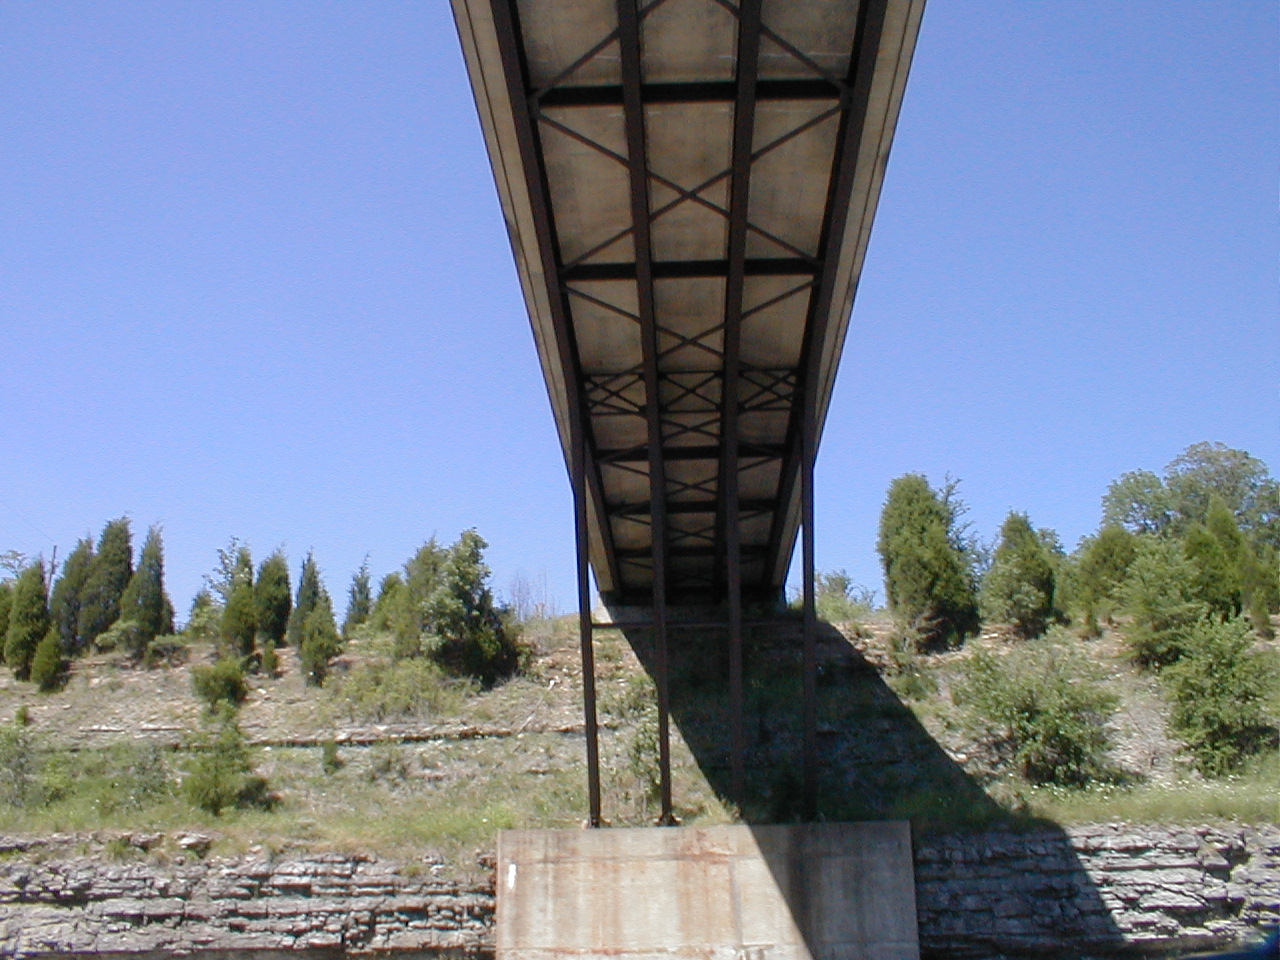 A view of the underside and supports of the bridge.